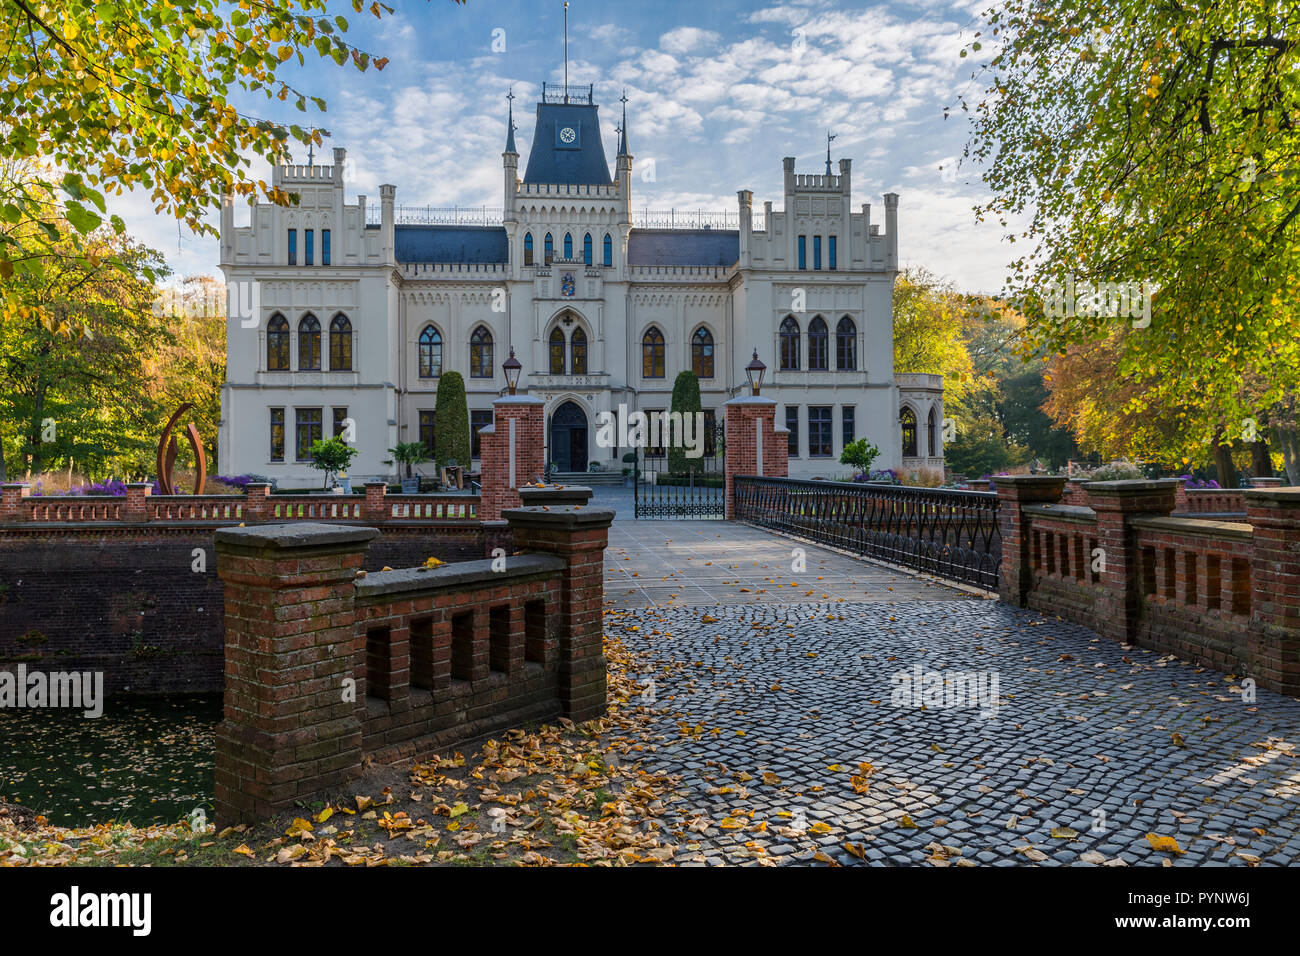 Evenburg Castle in Leer built in neo-Gothic style Stock Photo